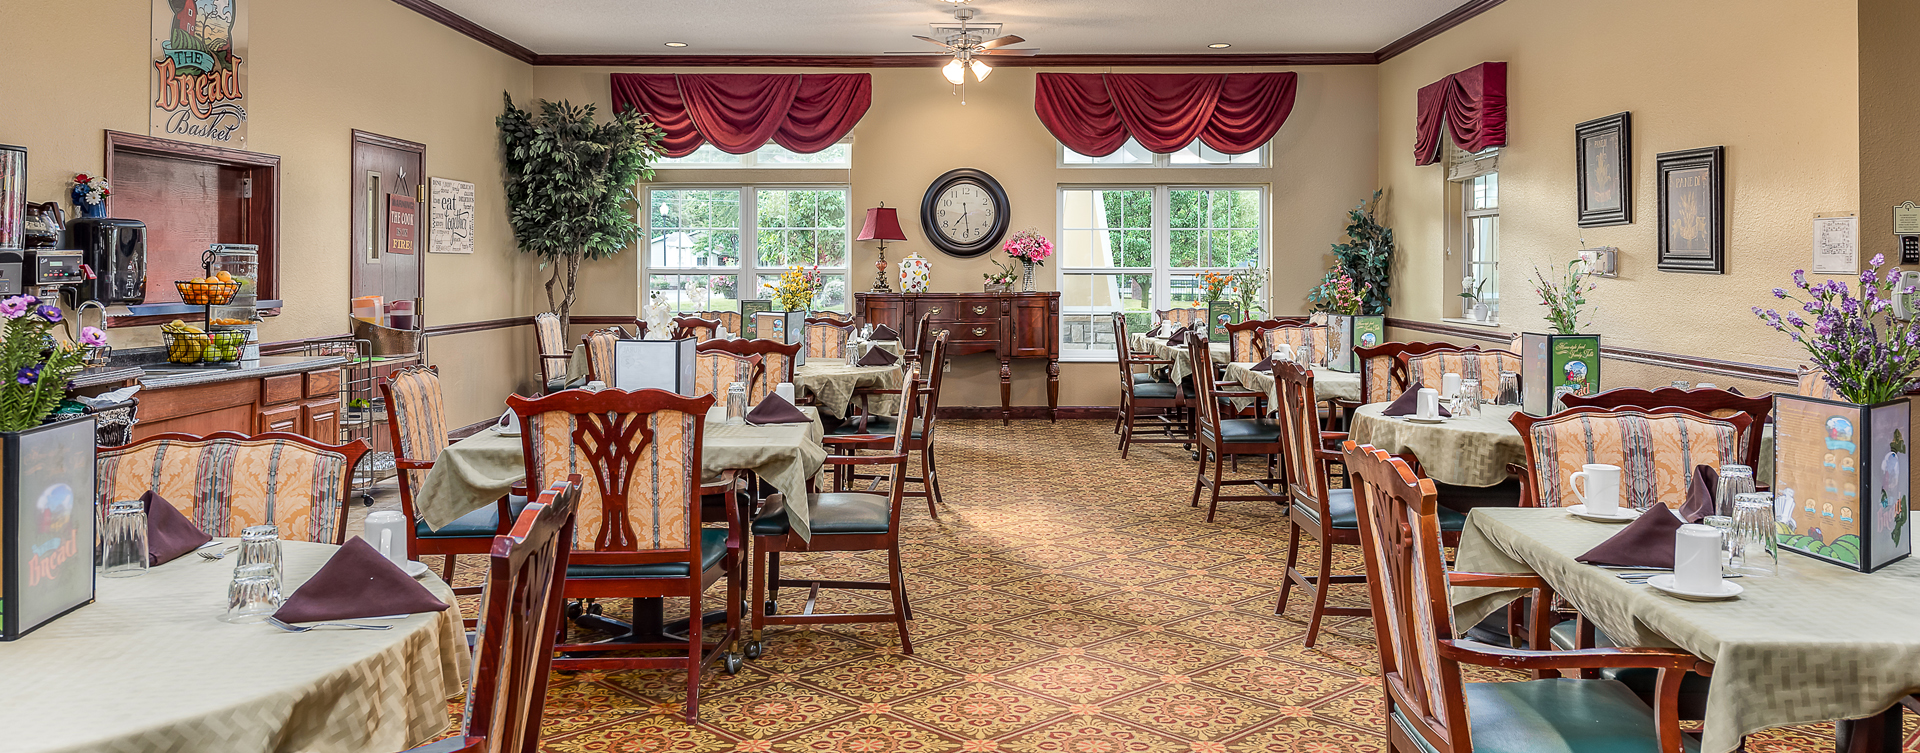 Enjoy homestyle food with made-from-scratch recipes in our dining room at Bickford of Saginaw Township